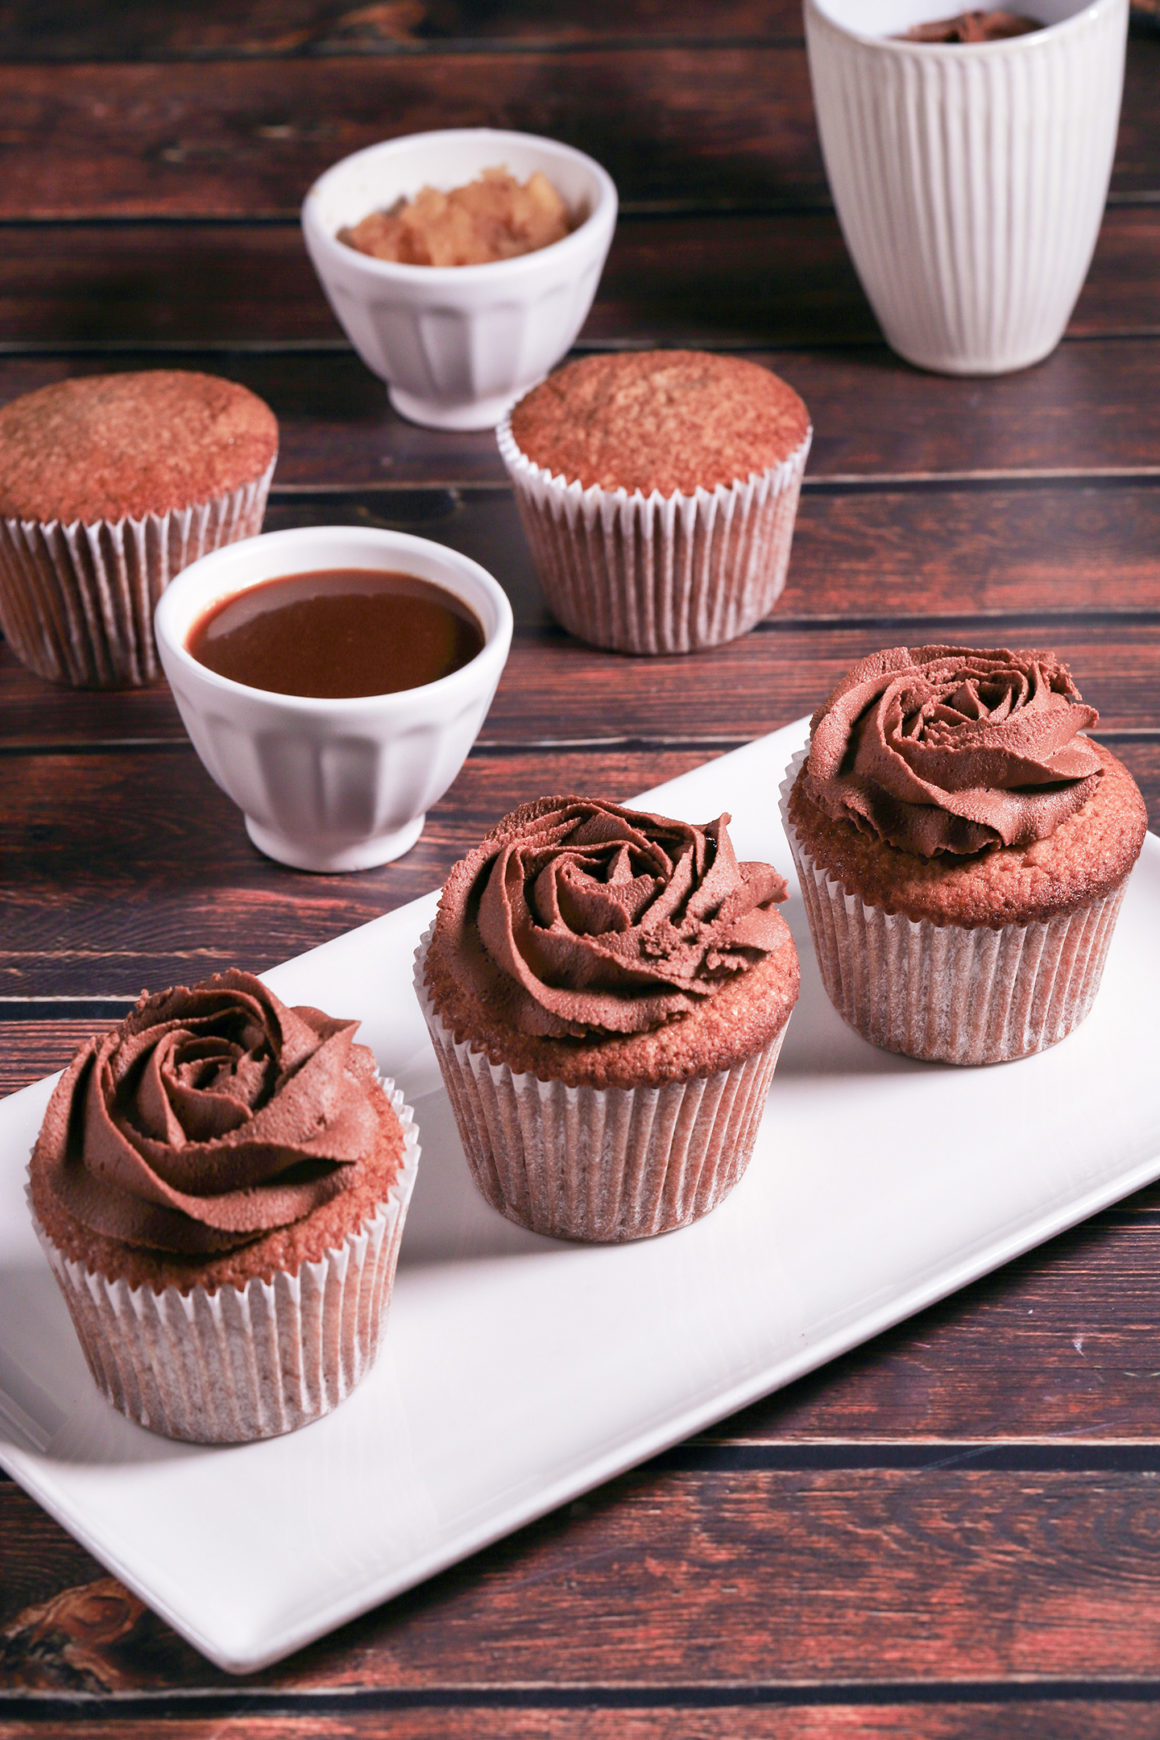 Caramel Cupcakes with Chocolate Frosting